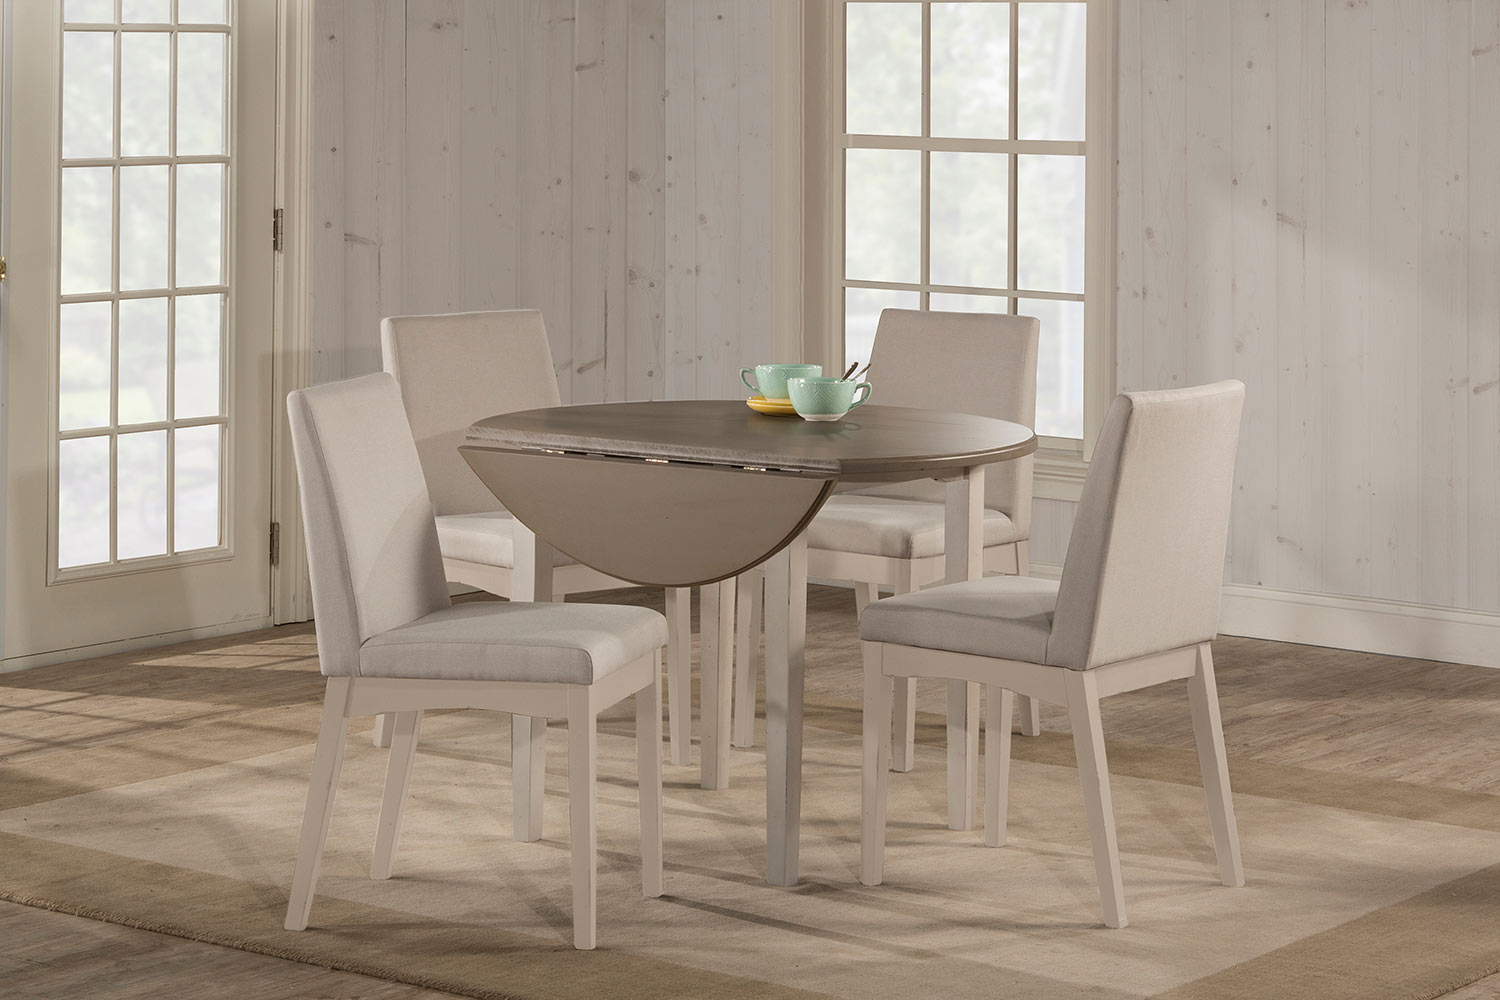 Hillsdale Clarion 5-Piece Round Dining Set with Upholstered Chairs - Sea White - Fog Fabric